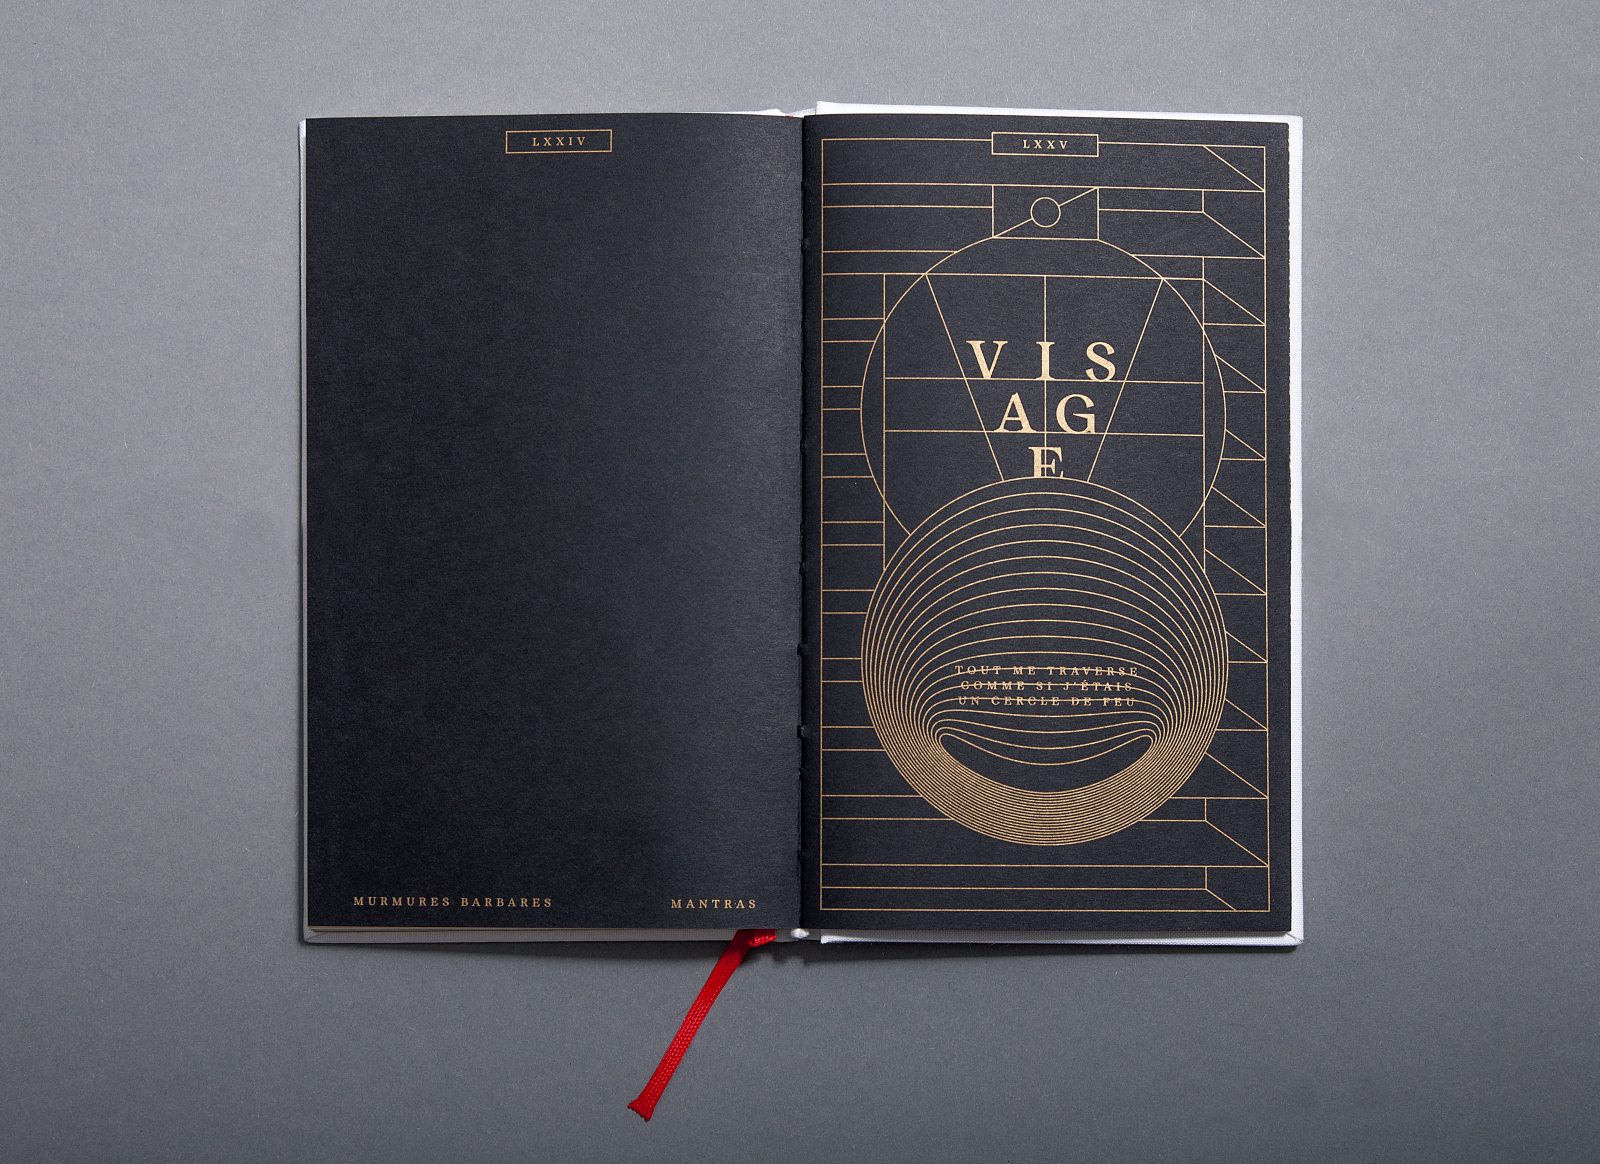 Mantras Album Package Design Inspired by Duality & Modern Religion